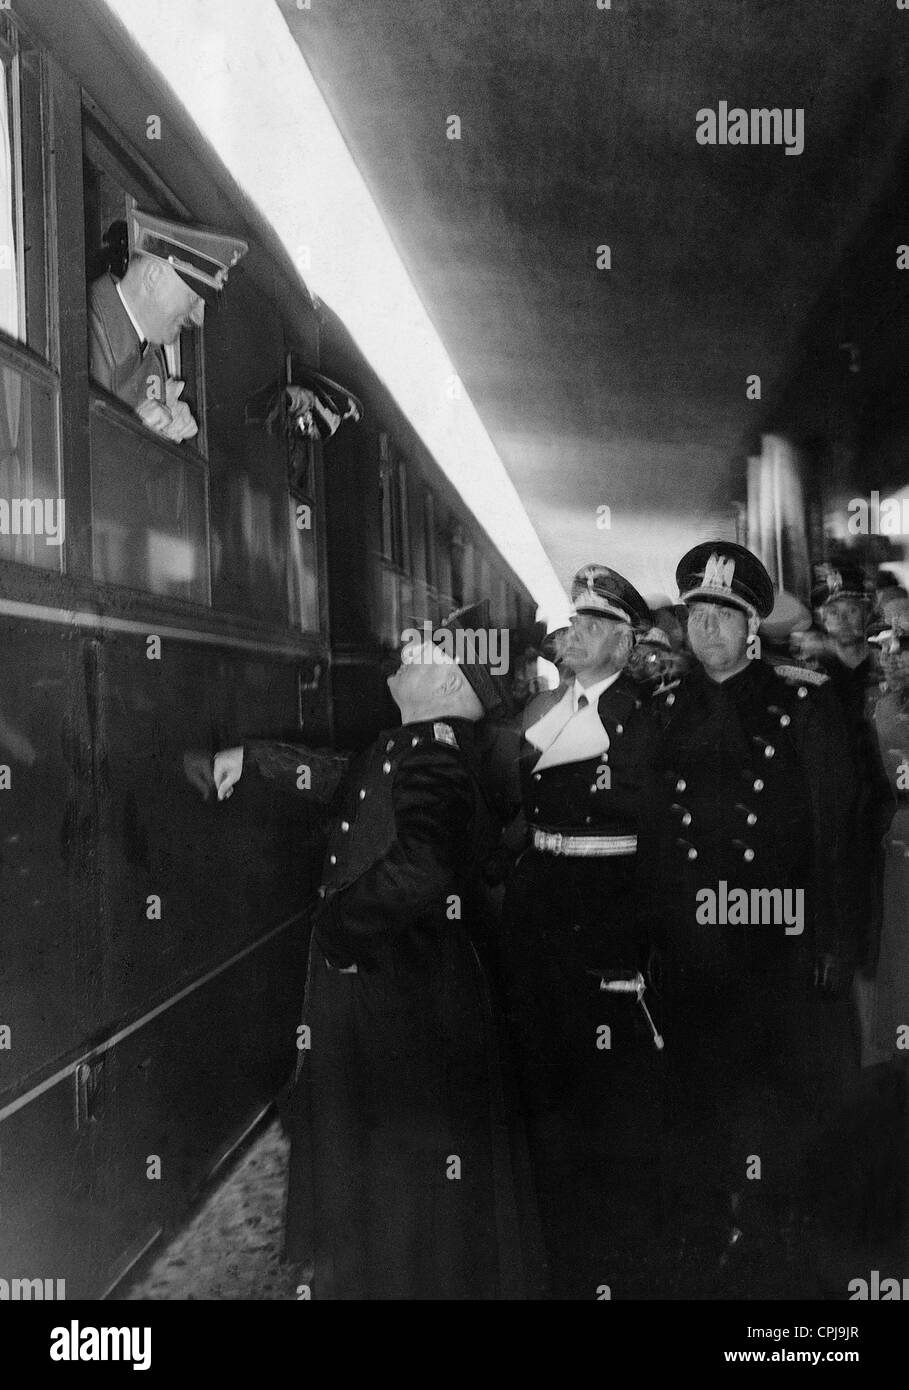 Benito Mussolini and Count Galeazzo Ciano welcome Adolf Hitler at the station, 1940 Stock Photo